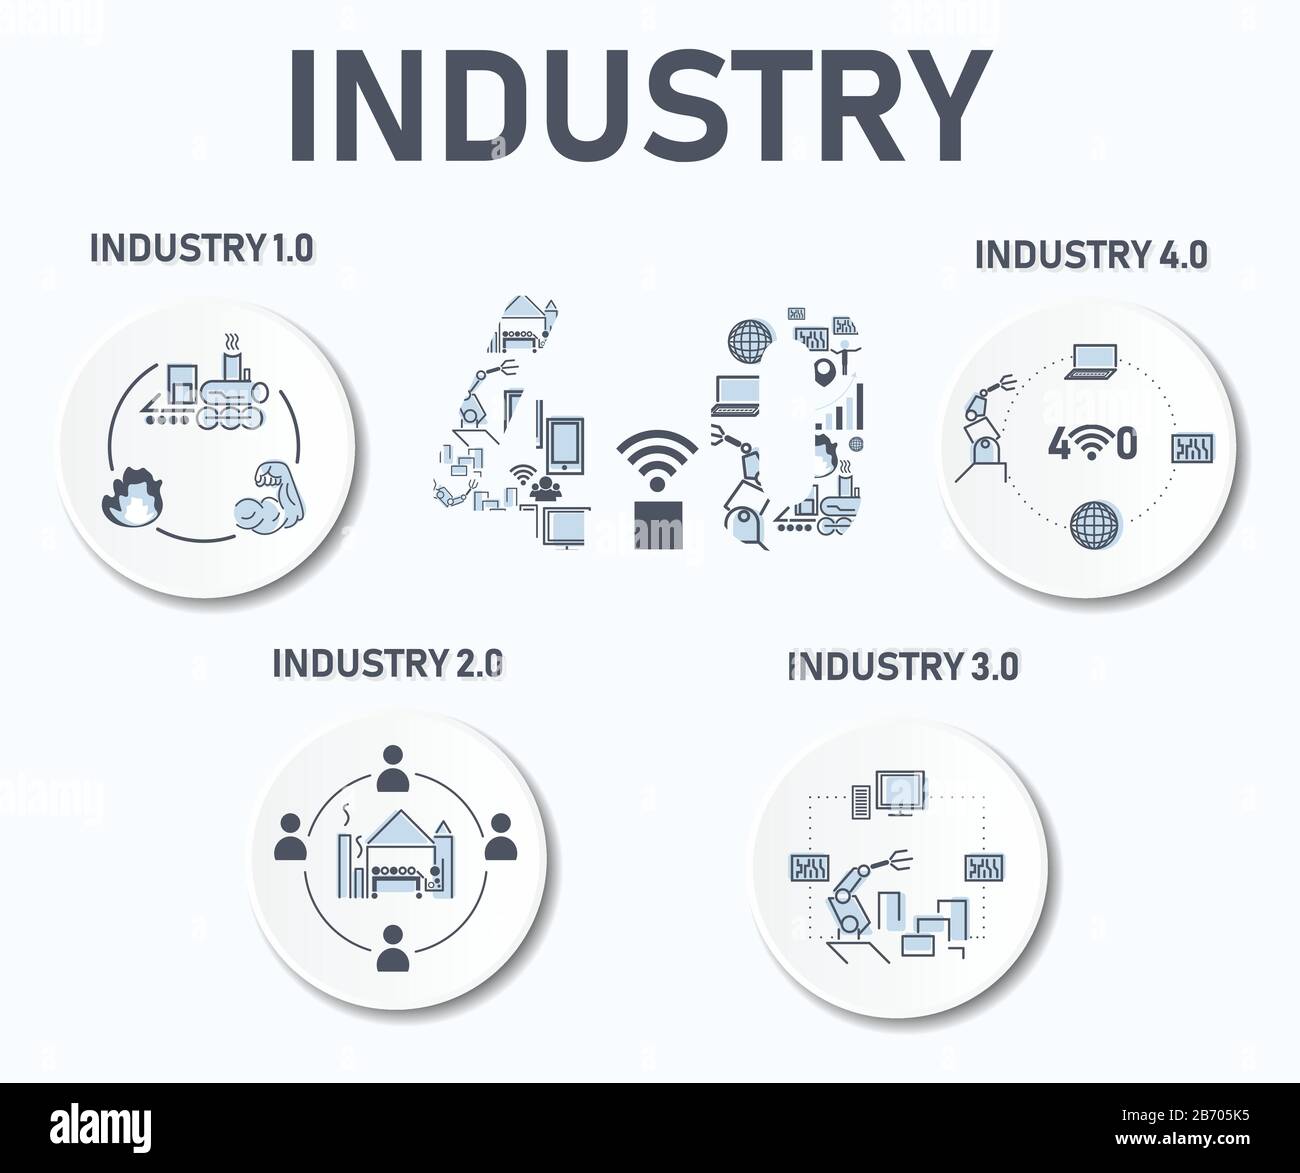 Industry infographic icon industrial revolution of steam power, manufactory, automation robot management and wireless communication. Stock Vector